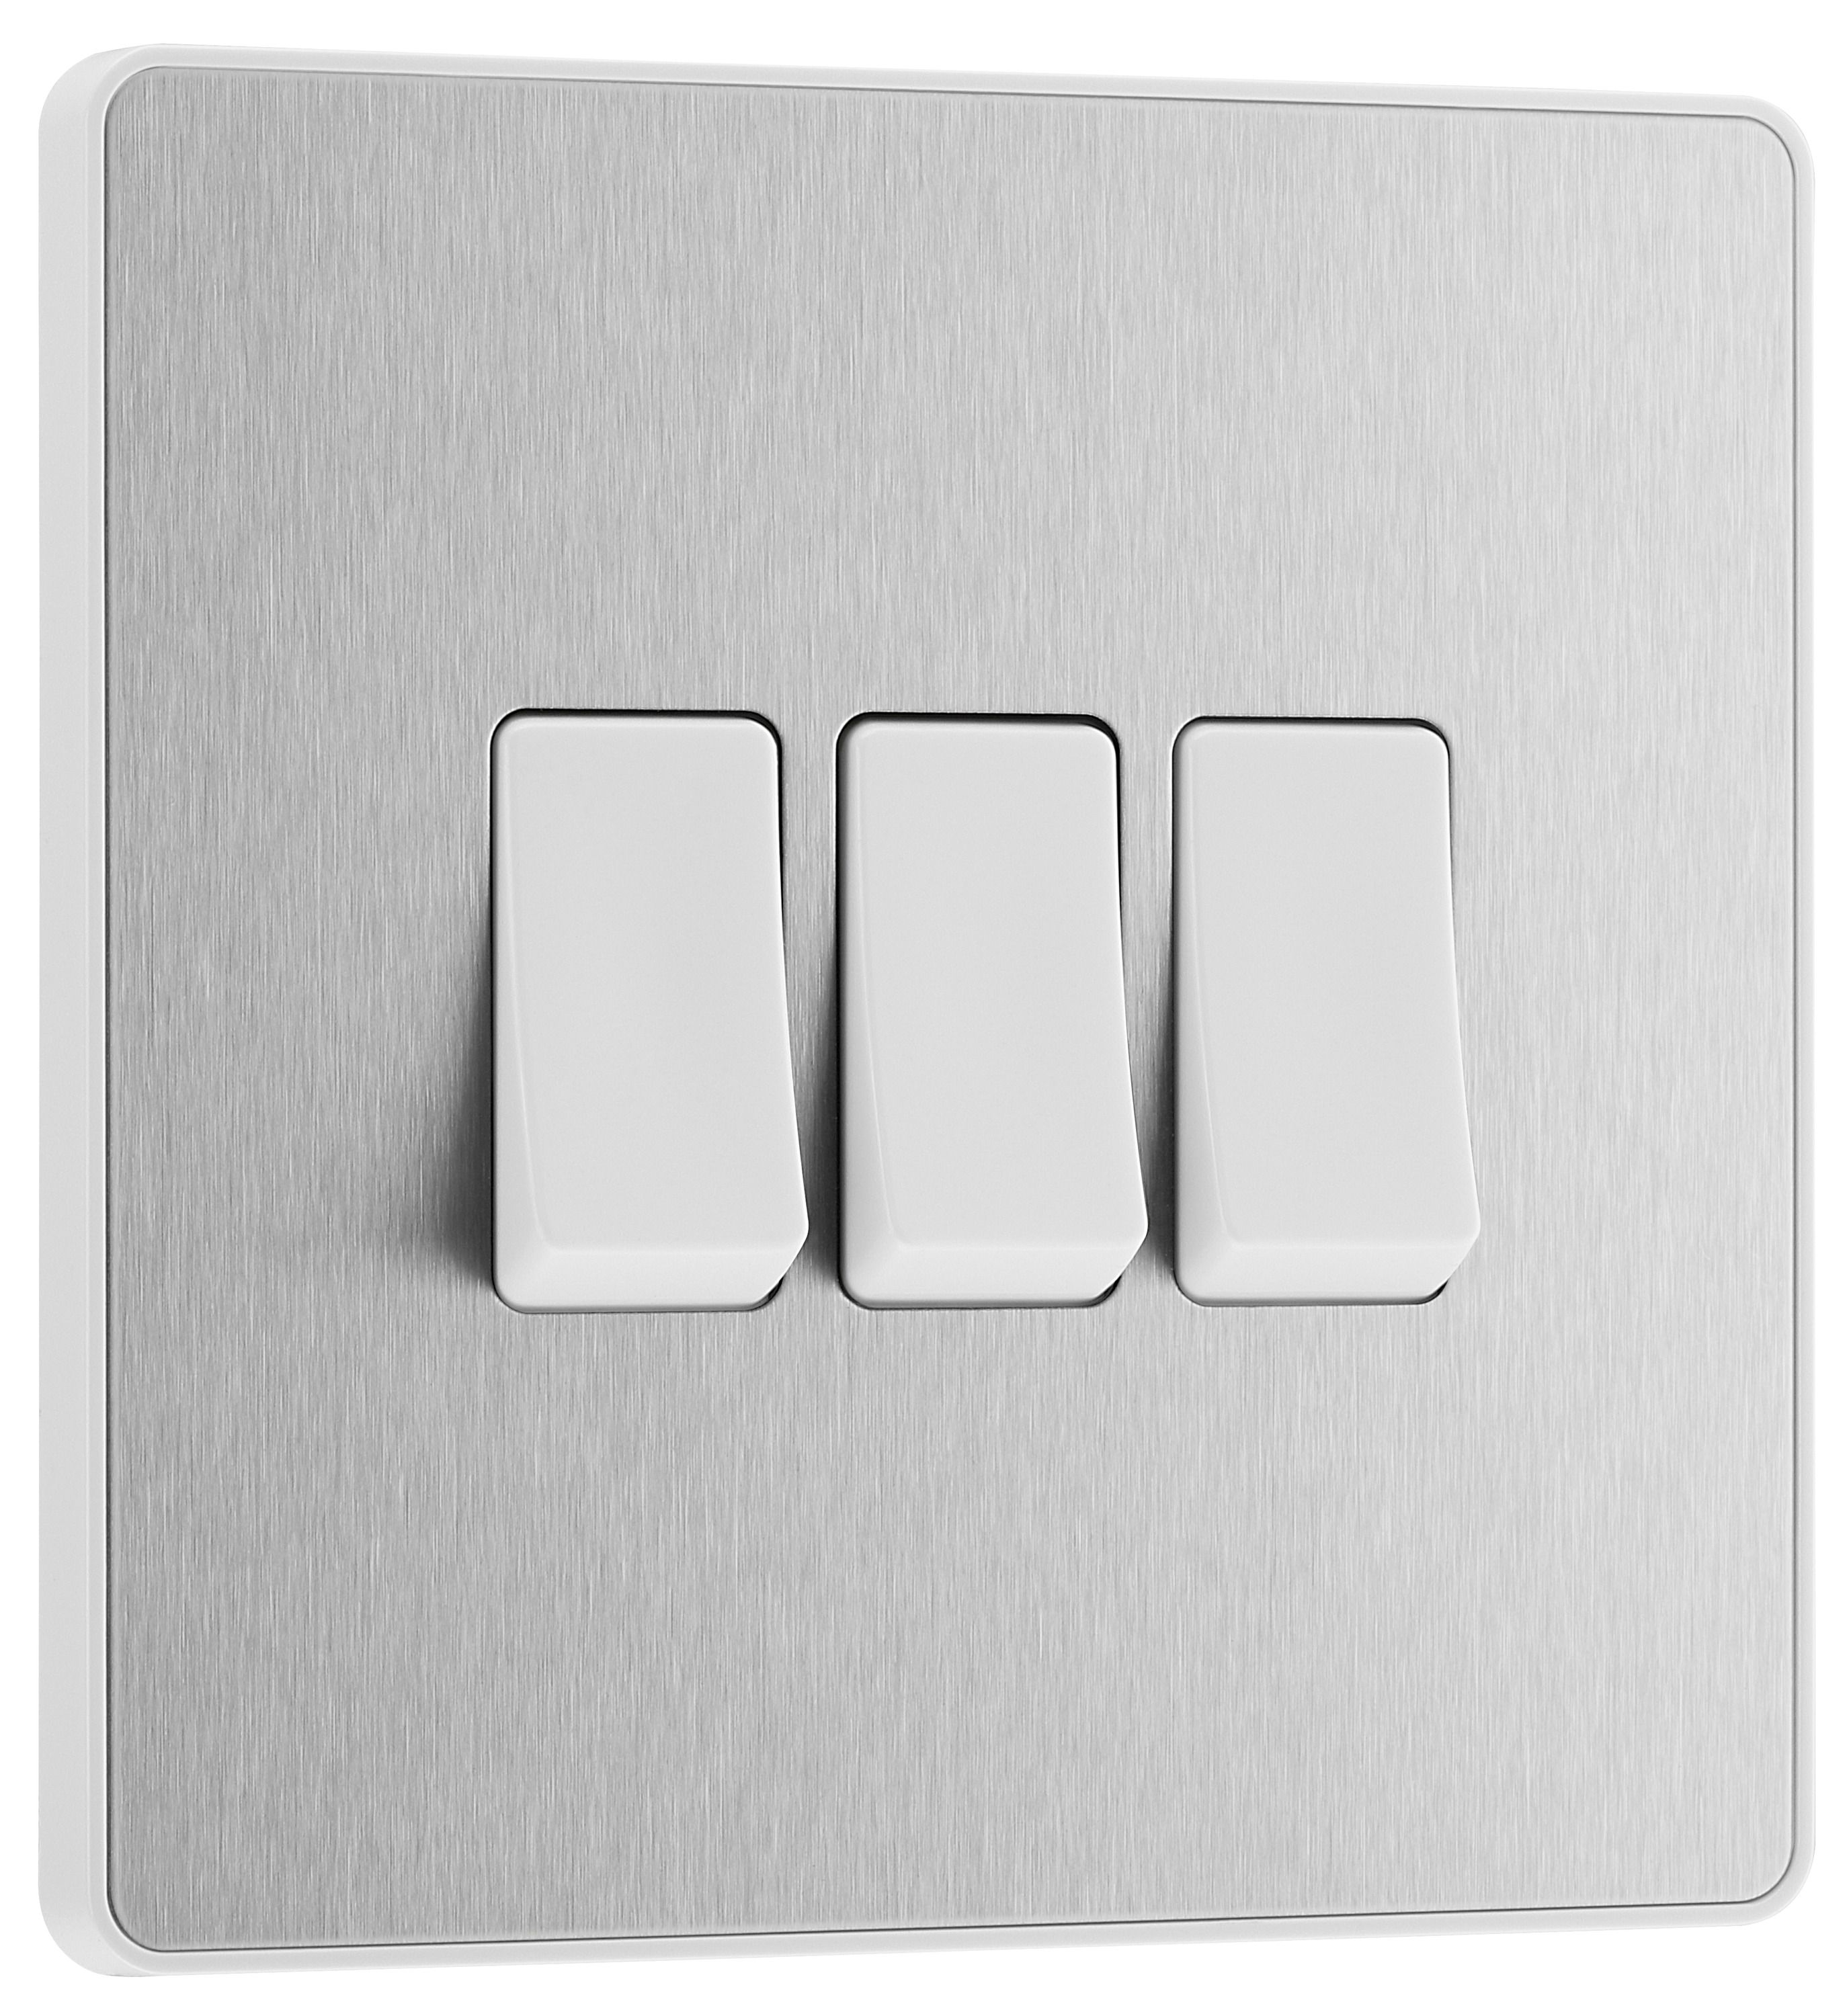 Image of BG Evolve Brushed Steel 20A 16Ax Triple Light Switch - 2 Way